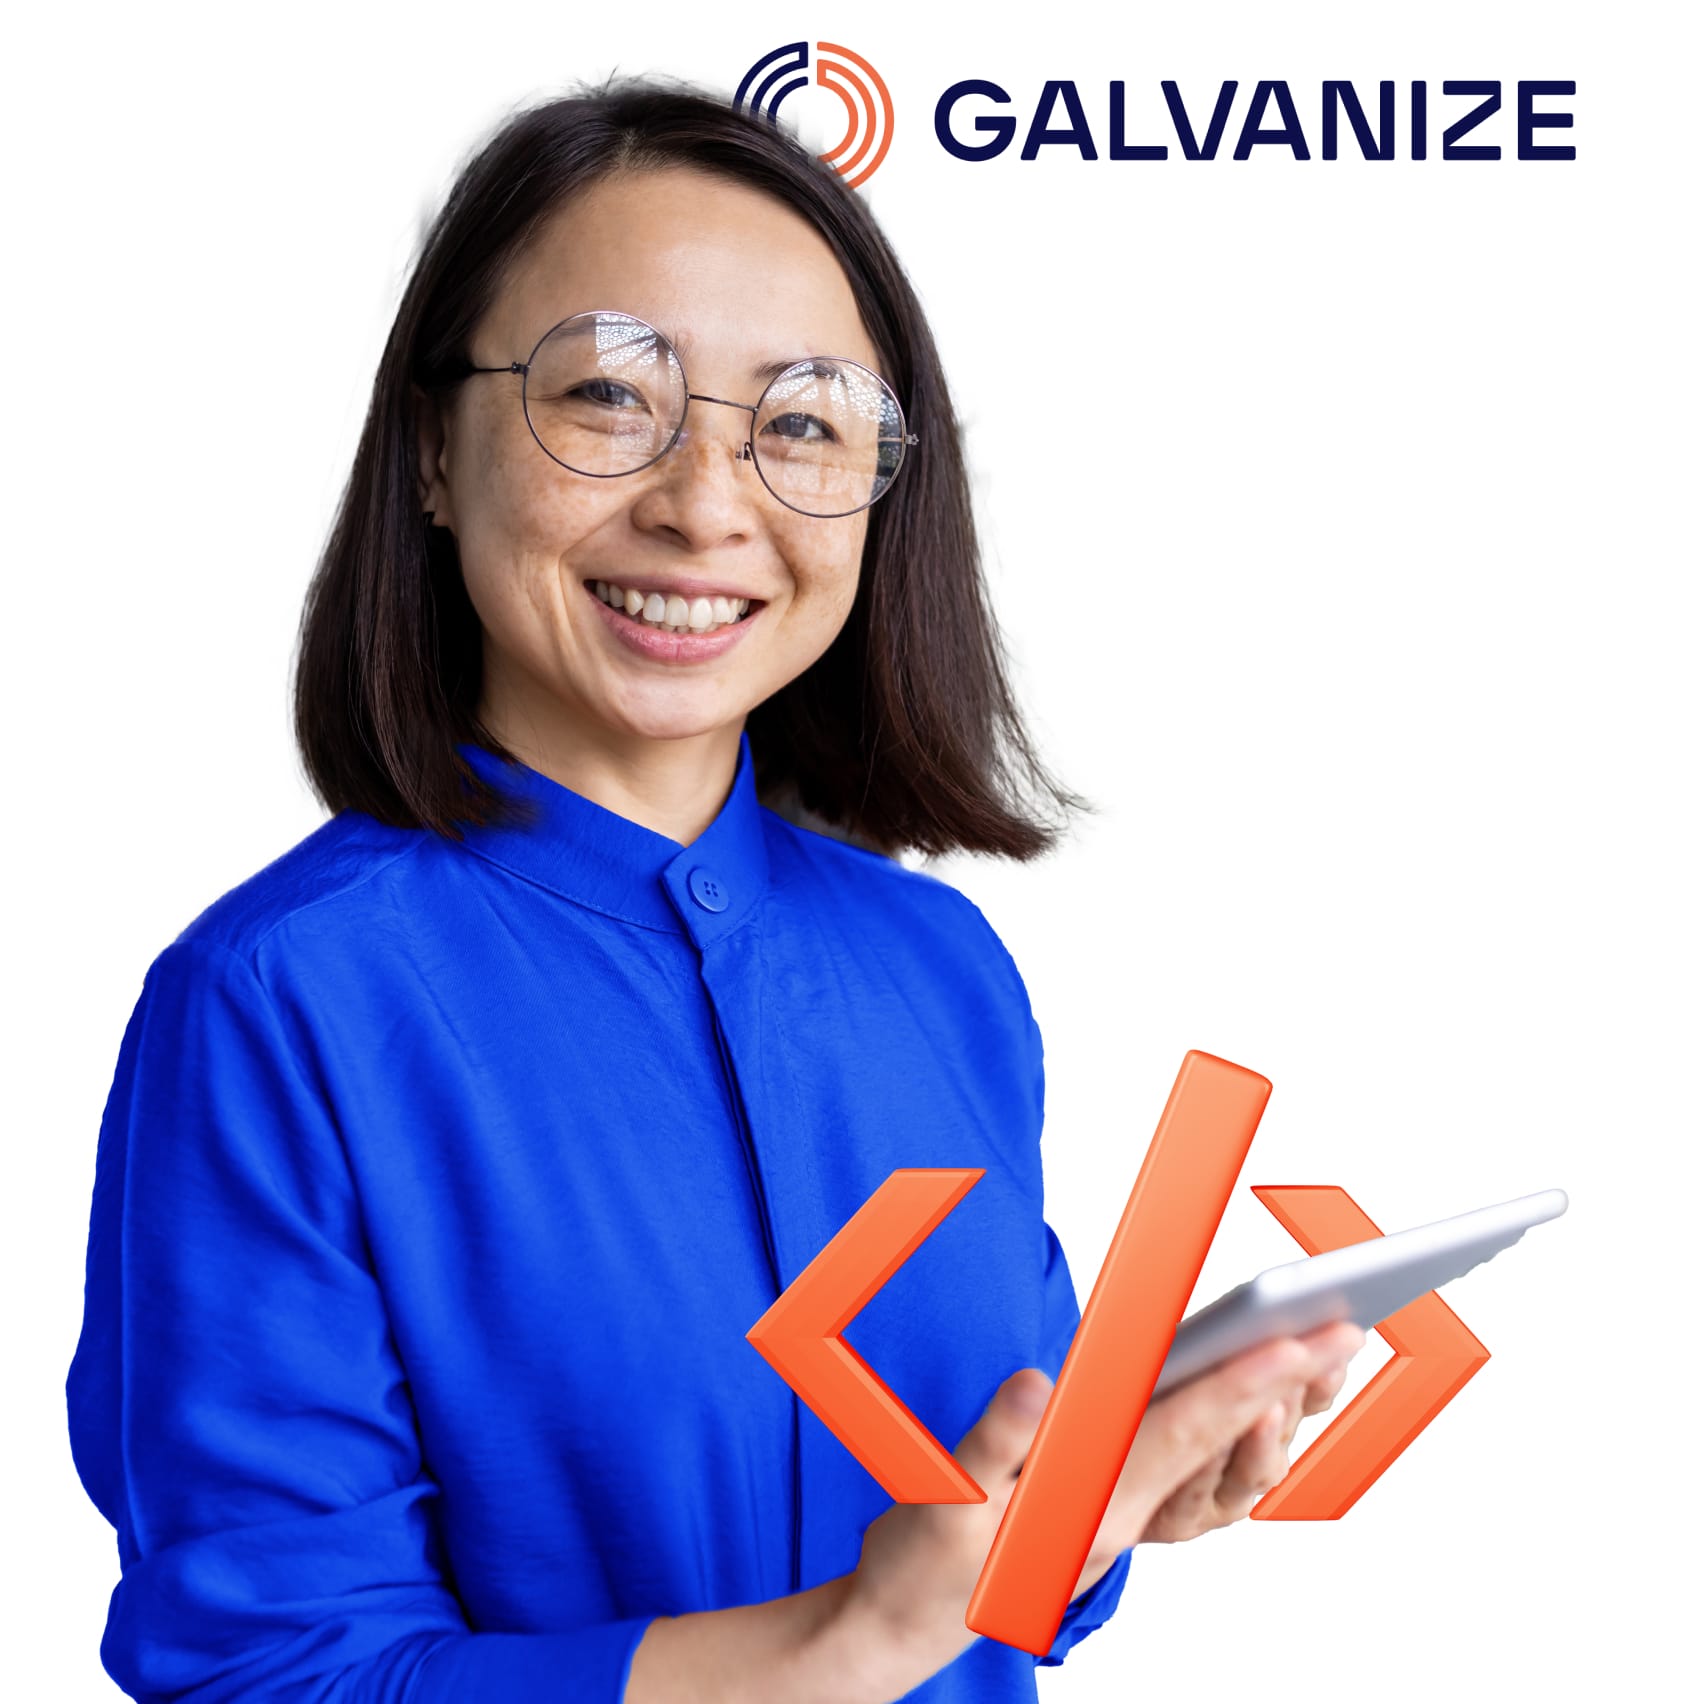 K12 For Business image 6 (name Galvanize 568x568 copy)